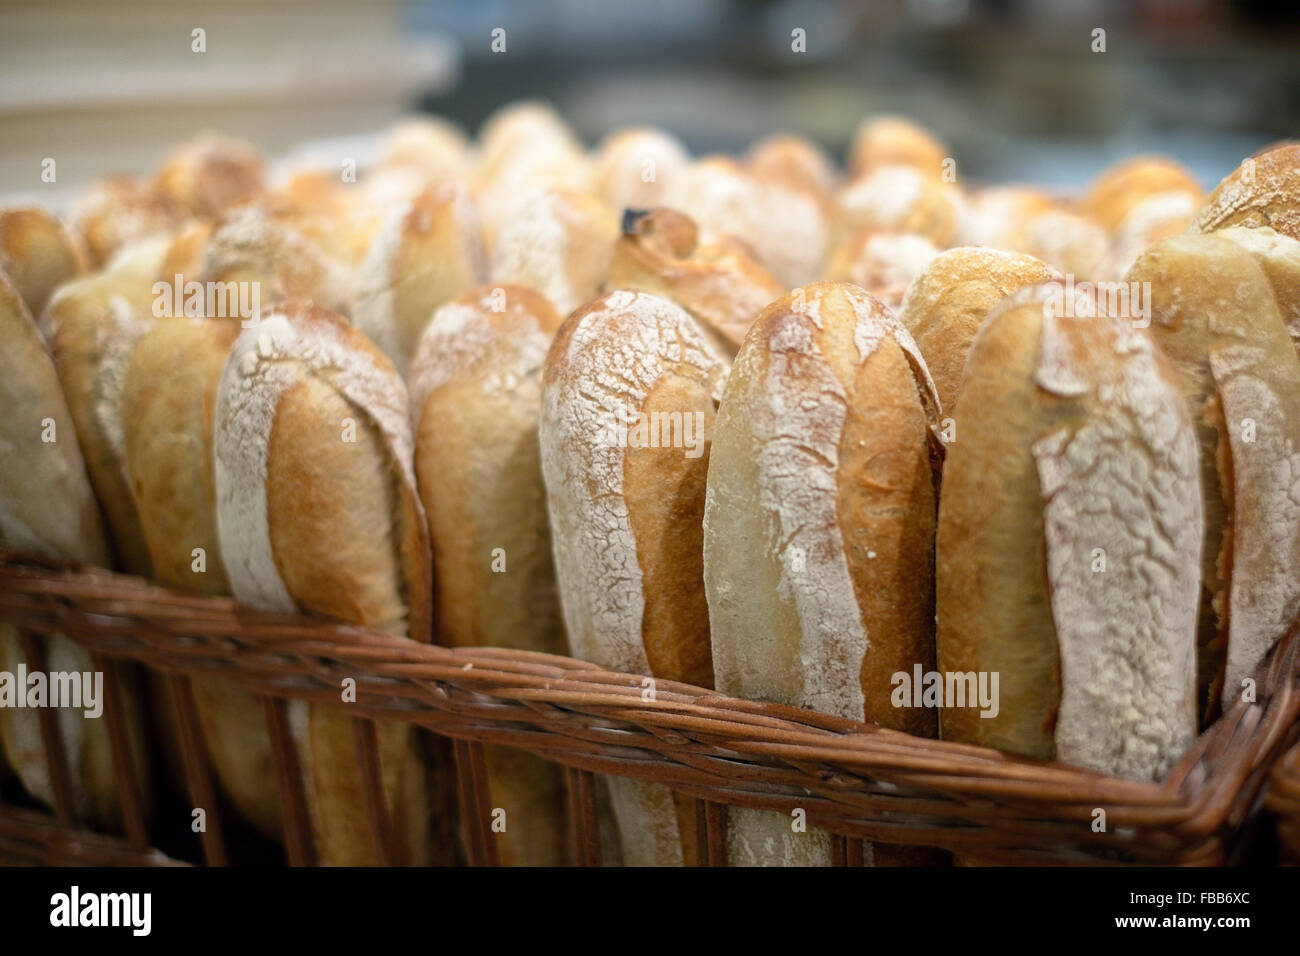 Close Up View a Basket Full of Freshly Baked French Bread Stock Photo